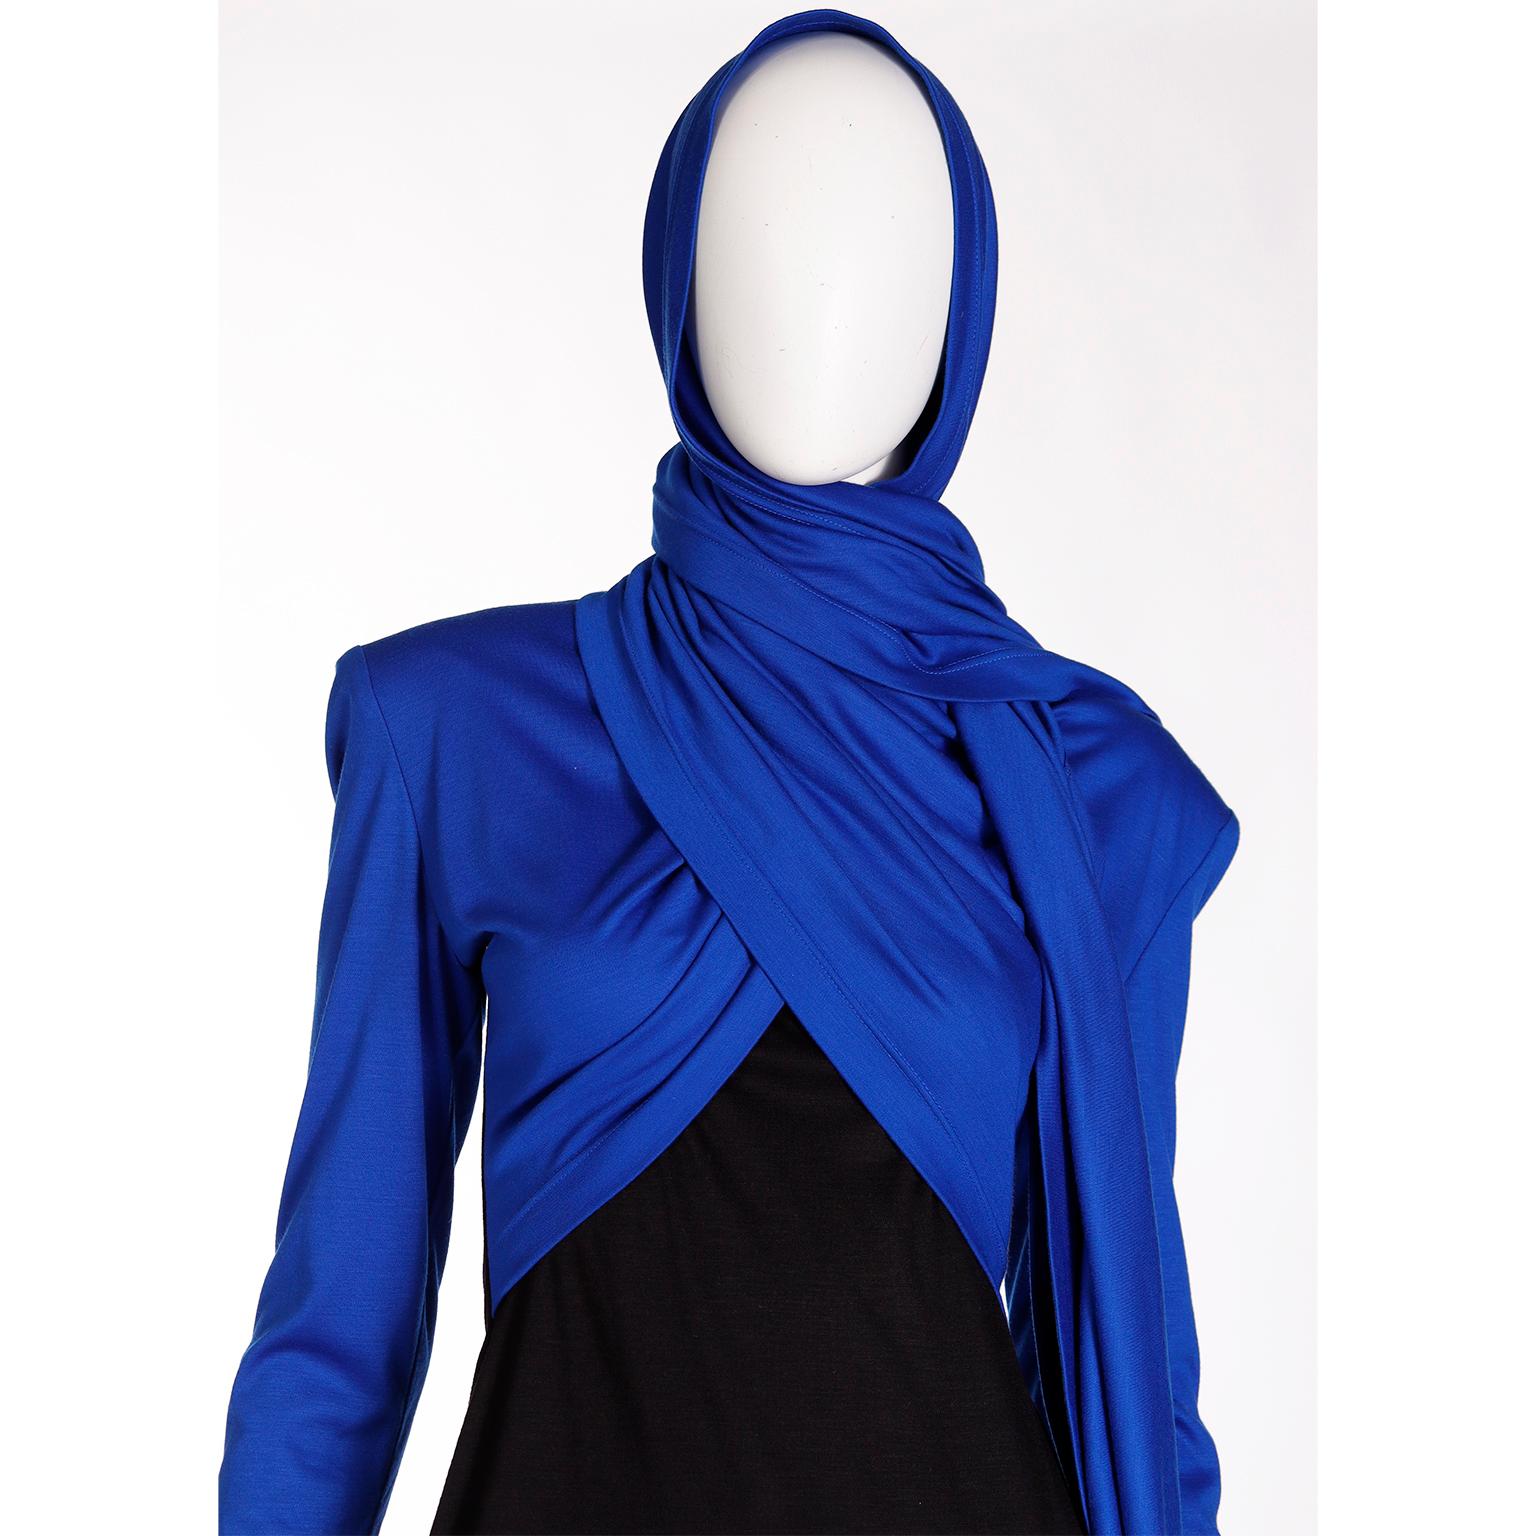 FW 1989 Patrick Kelly Runway Dress in Blue & Black Knit with Head Scarf  For Sale 15